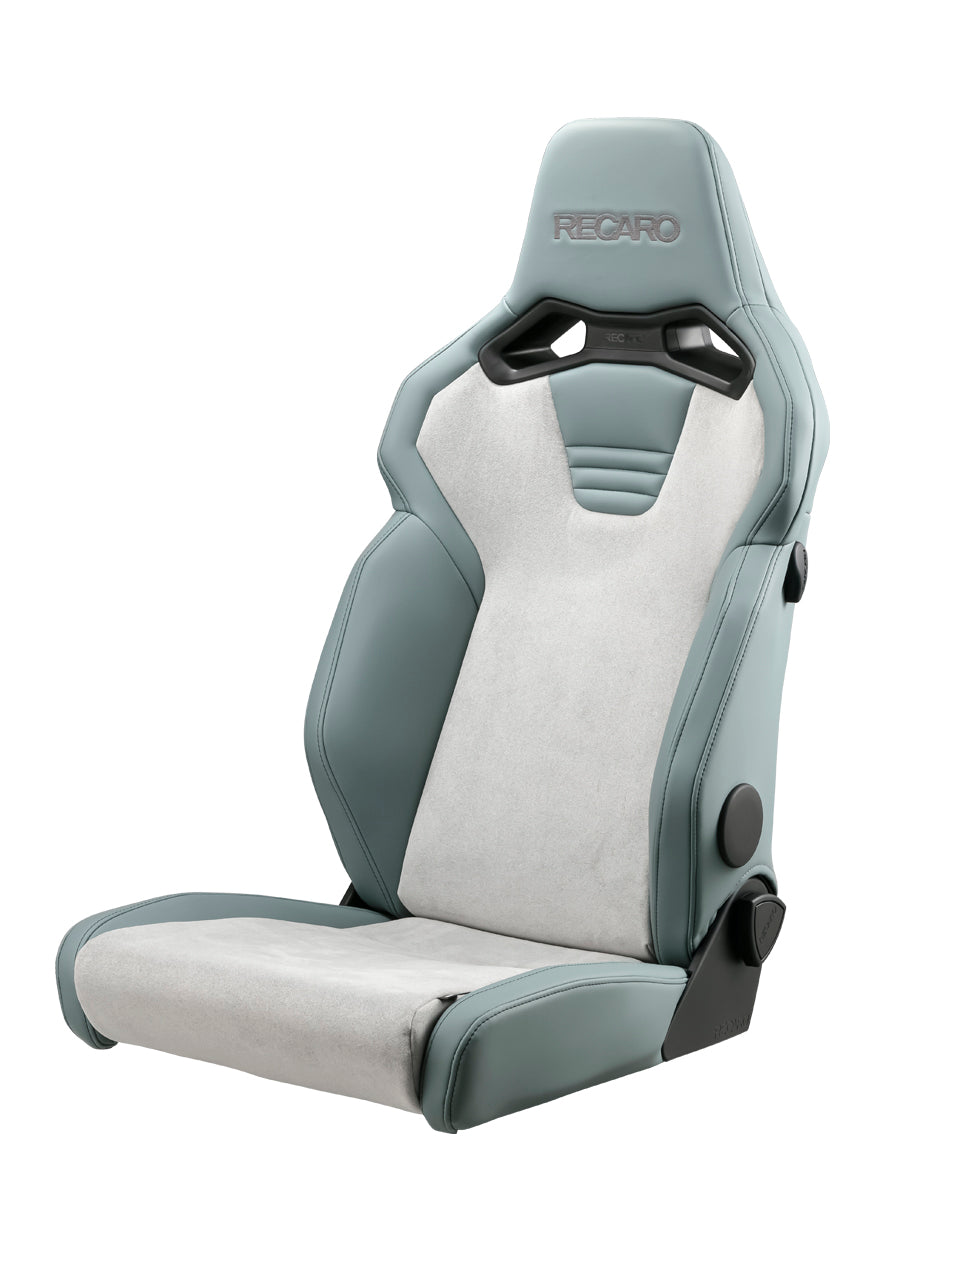 RECARO SR-C UT100 MG SG ARTIFICIAL LEATHER SURGE GRAY COLOR AND ULTRA SUEDE MELANGE GRAY COLOR SEAT FOR  81-121.20.648-0